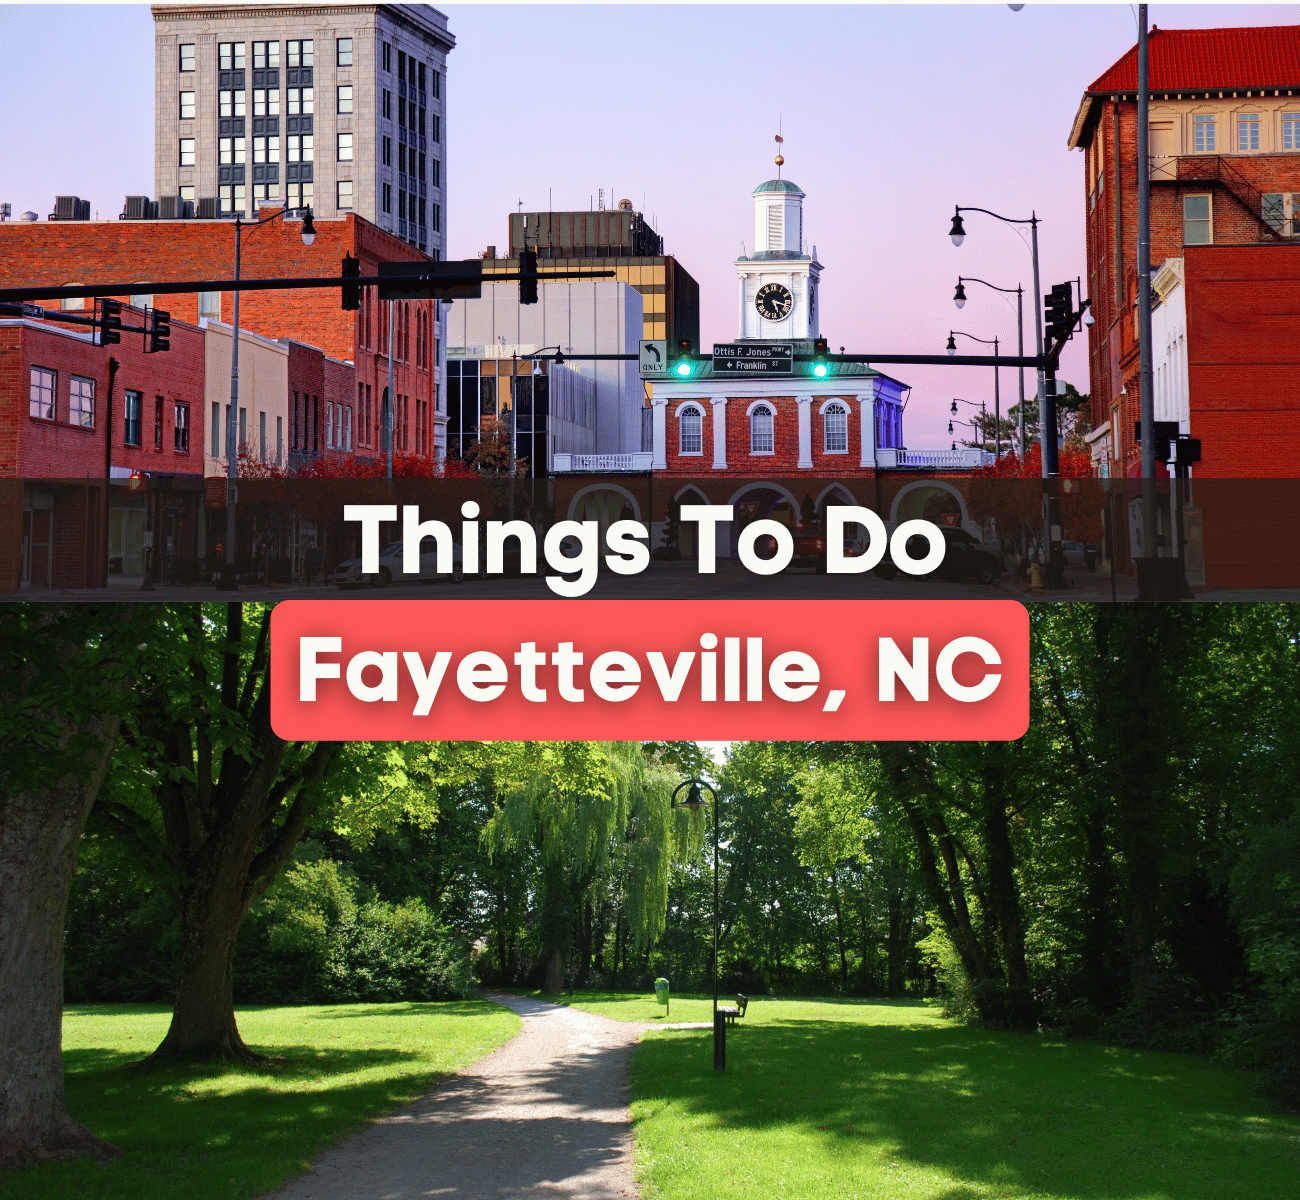 things to do in Fayetteville, NC - park and downtown Fayetteville during sunset